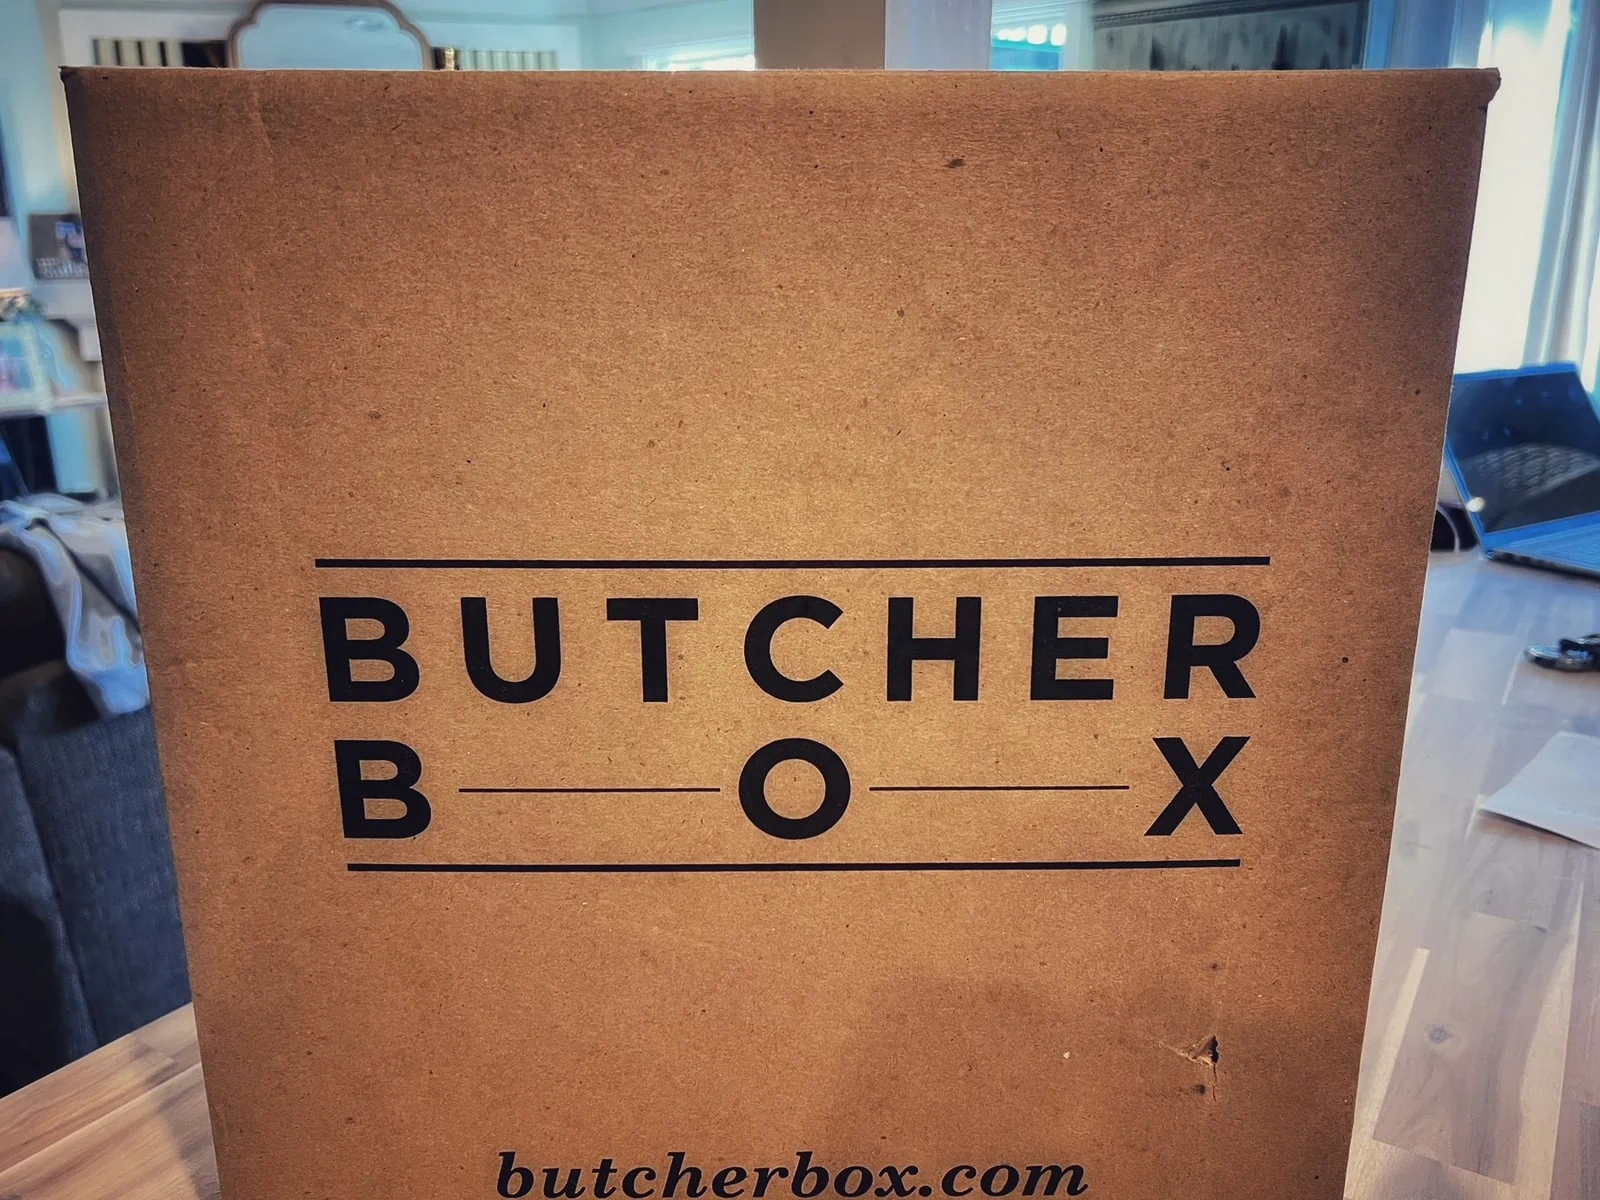 Butcherbox discount code and details